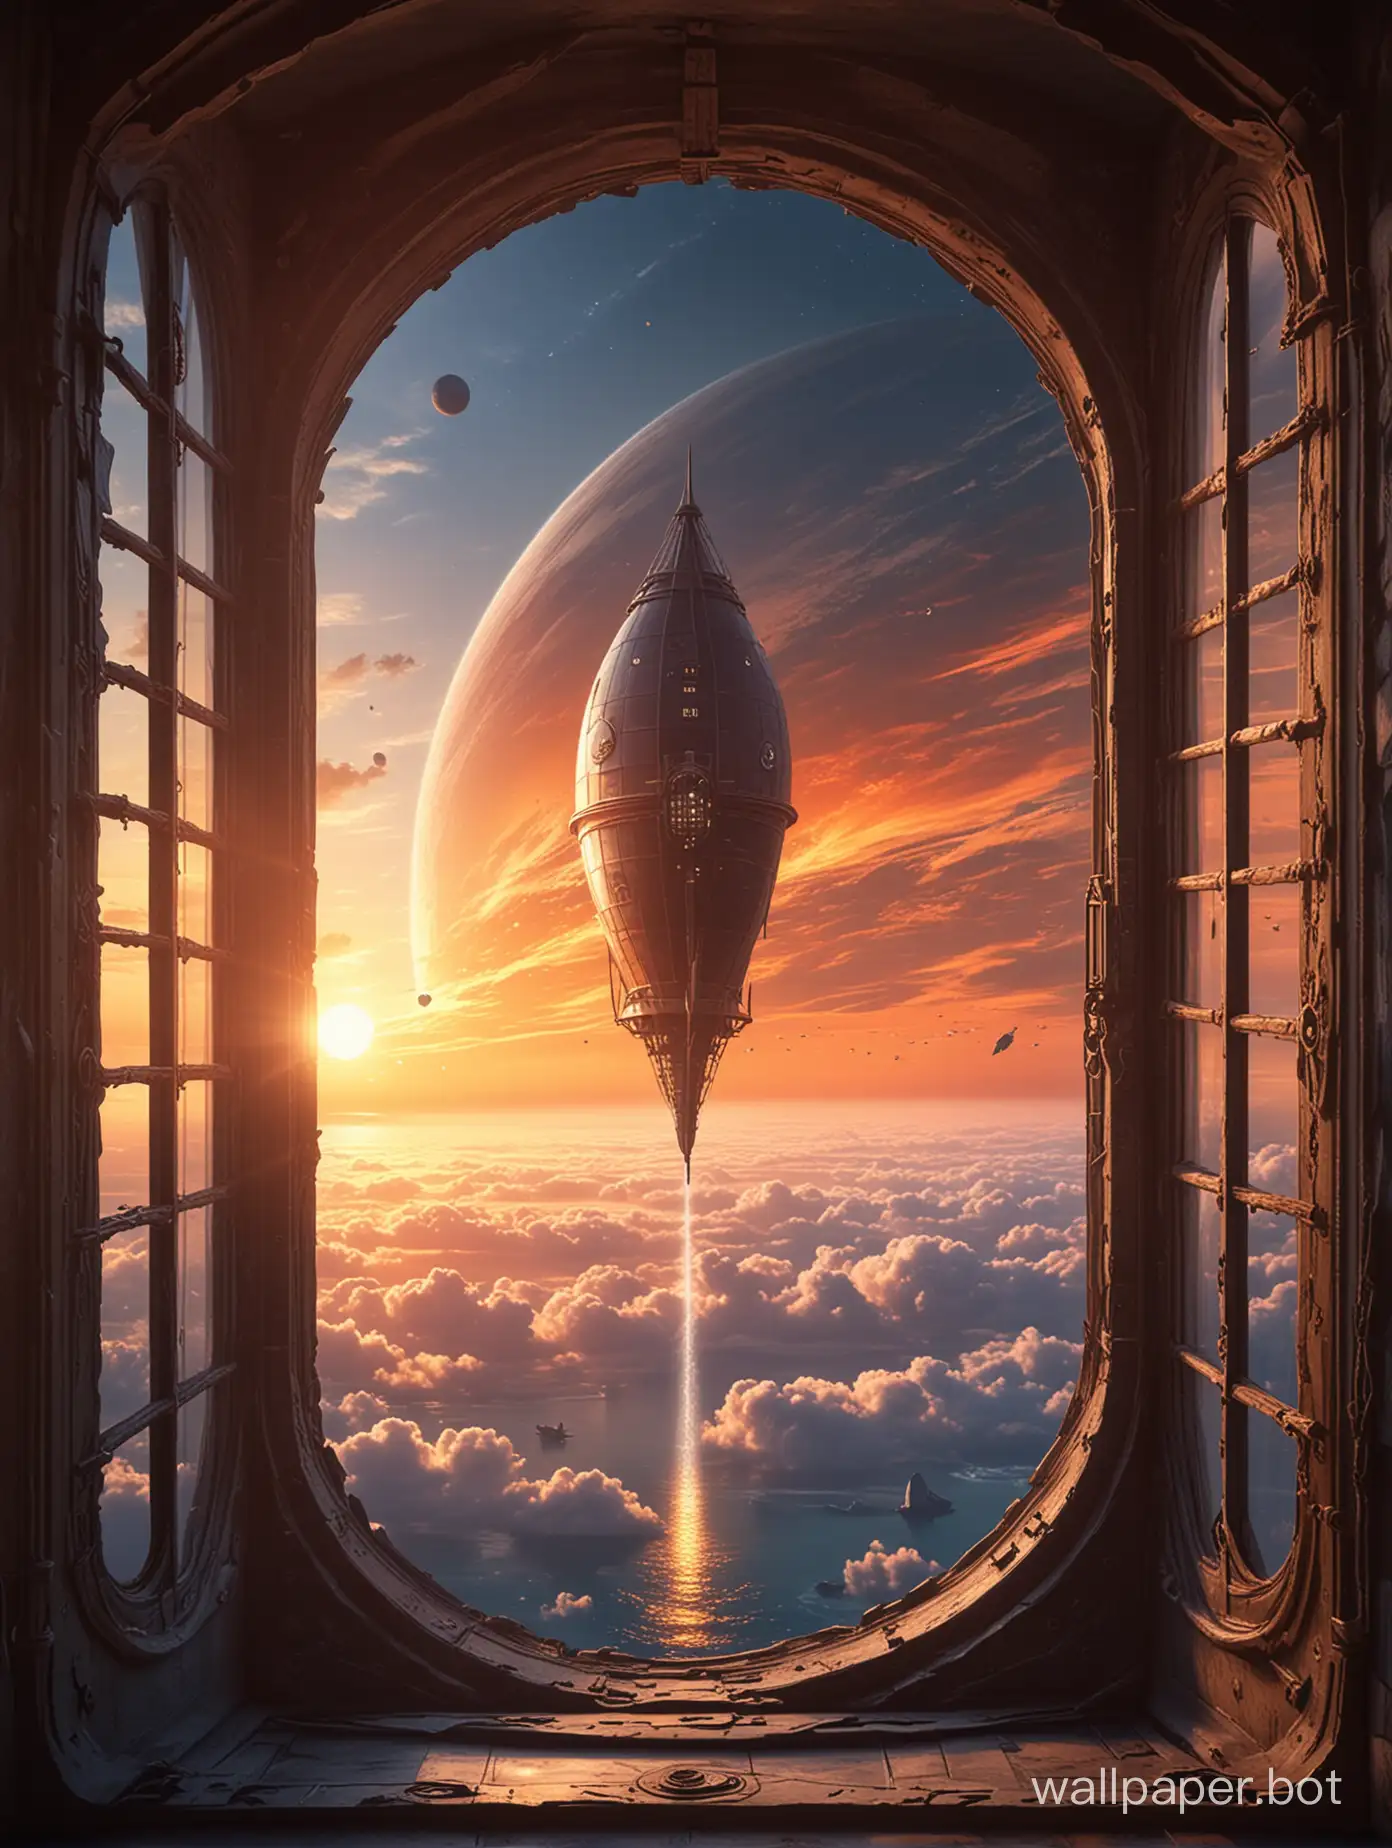 Fantasy-Space-Tower-with-Sunset-Sky-and-Airship-HighDefinition-SciFi-Anime-Art